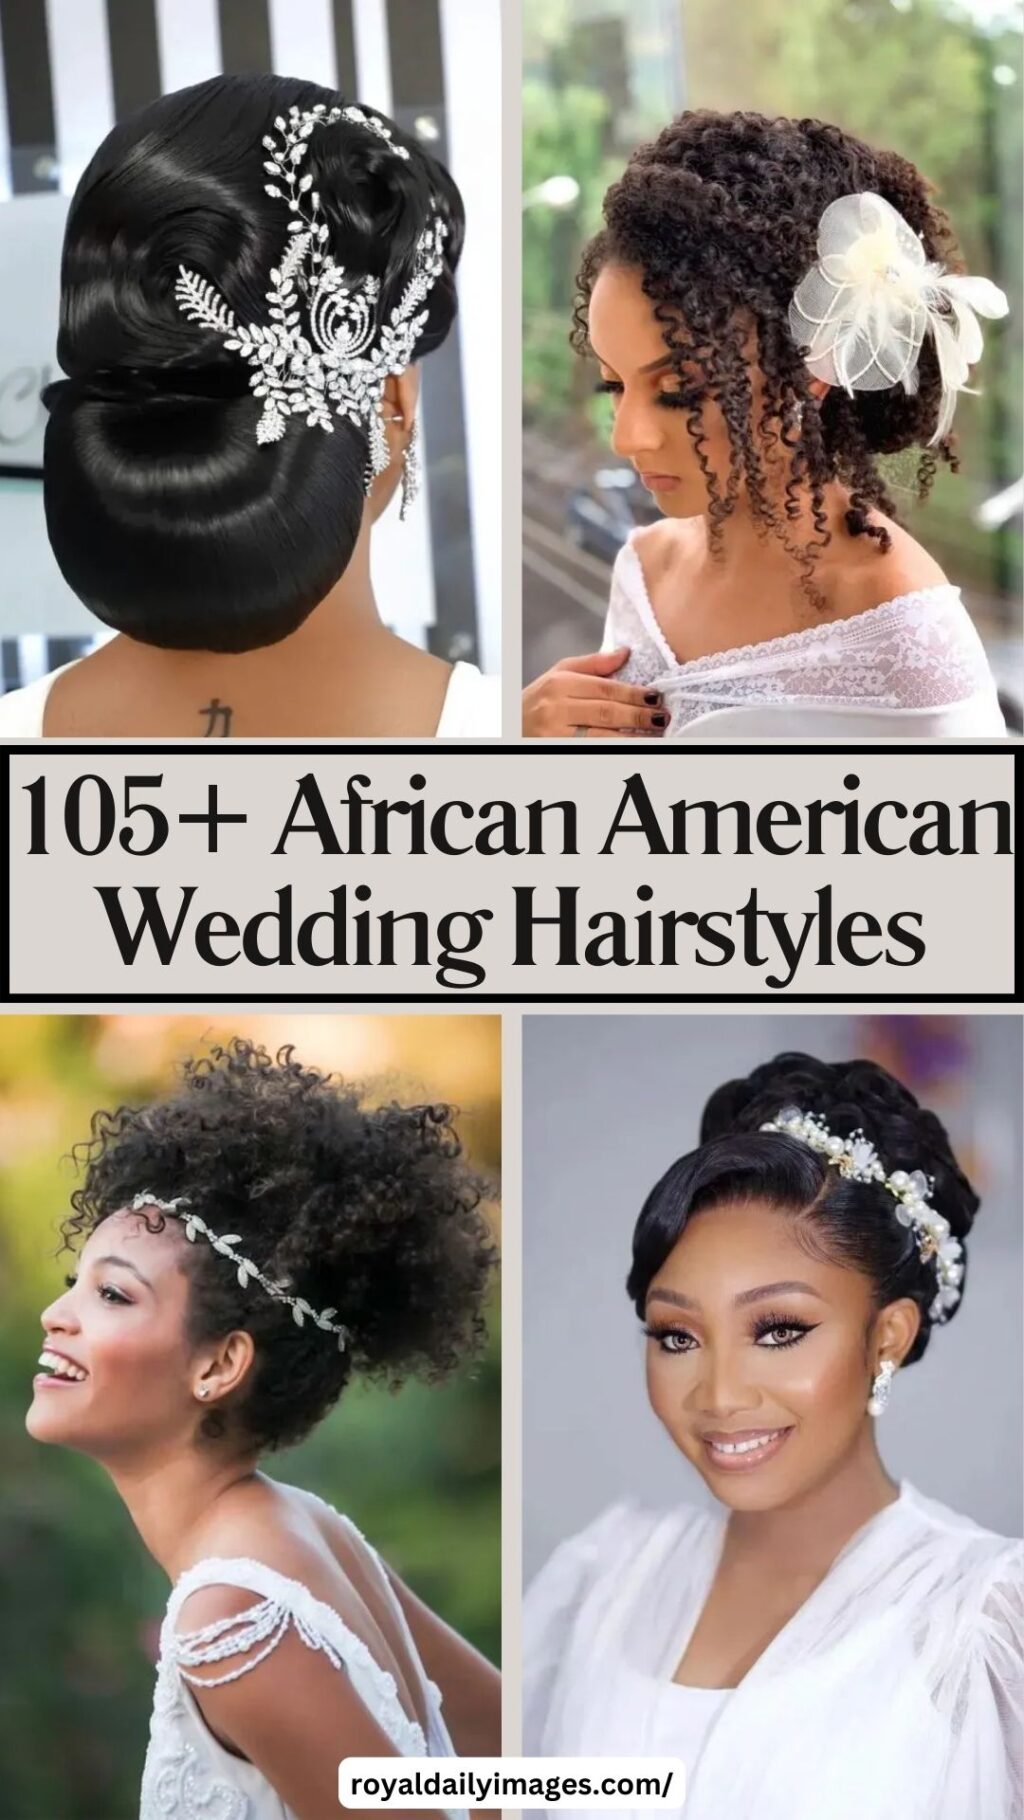 105+ African American Bridal Hairstyles for Stunning Wedding Looks